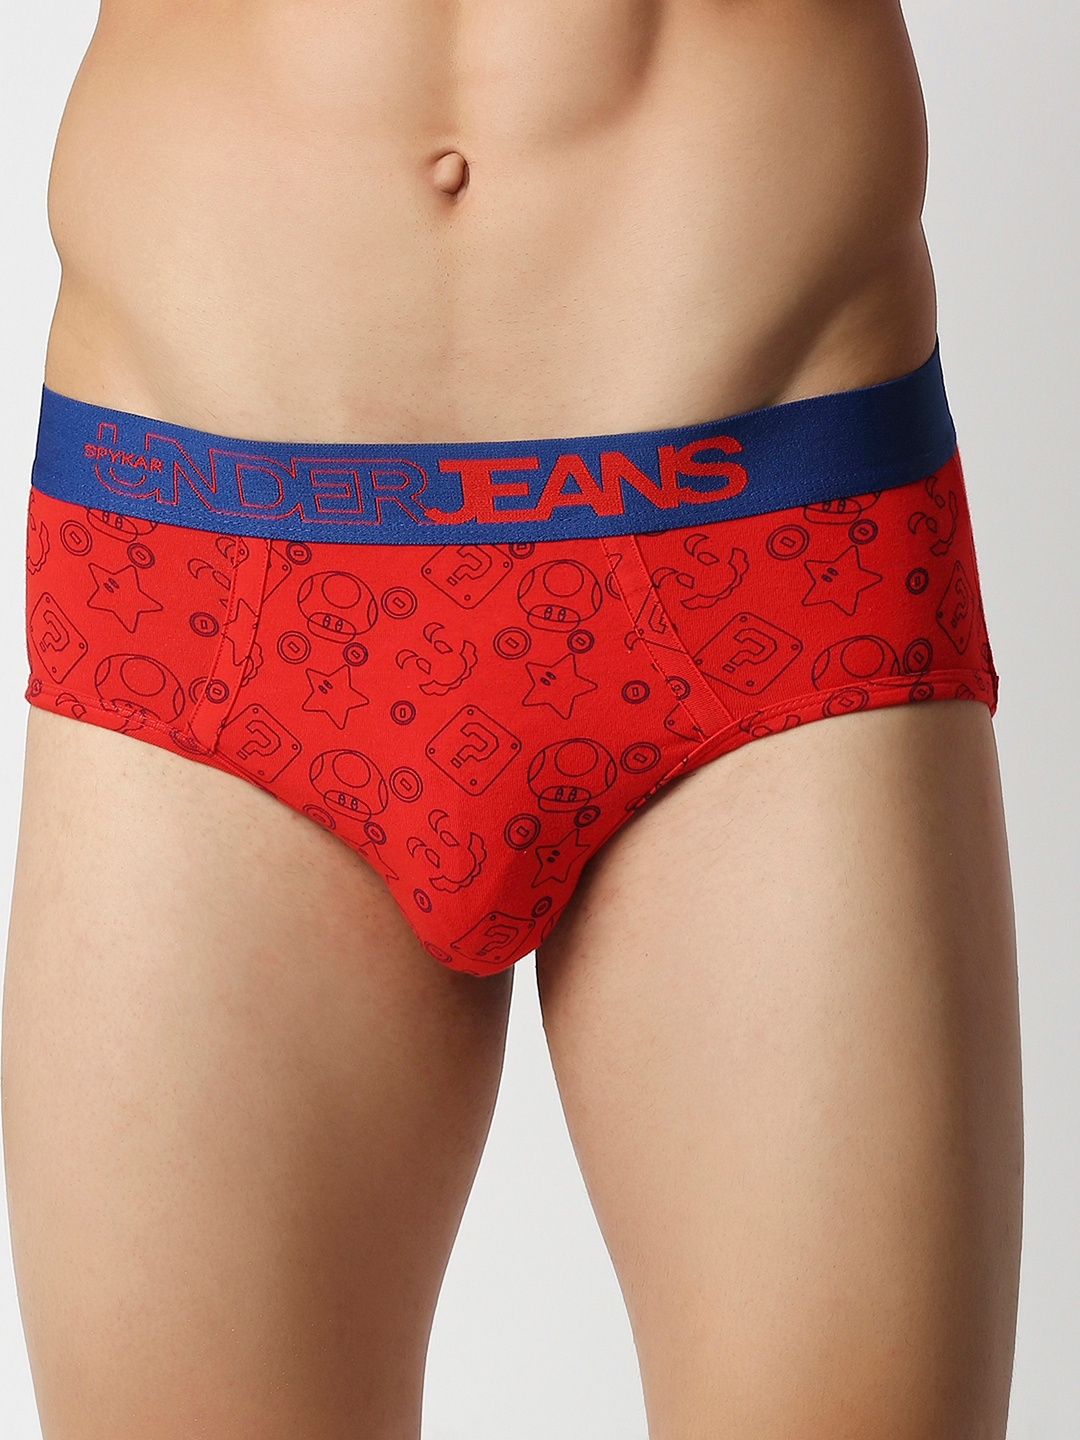 spykar | Underjeans by Spykar Premium Red Yellow & White Cotton Blend Printed Brief - Pack Of 3 1